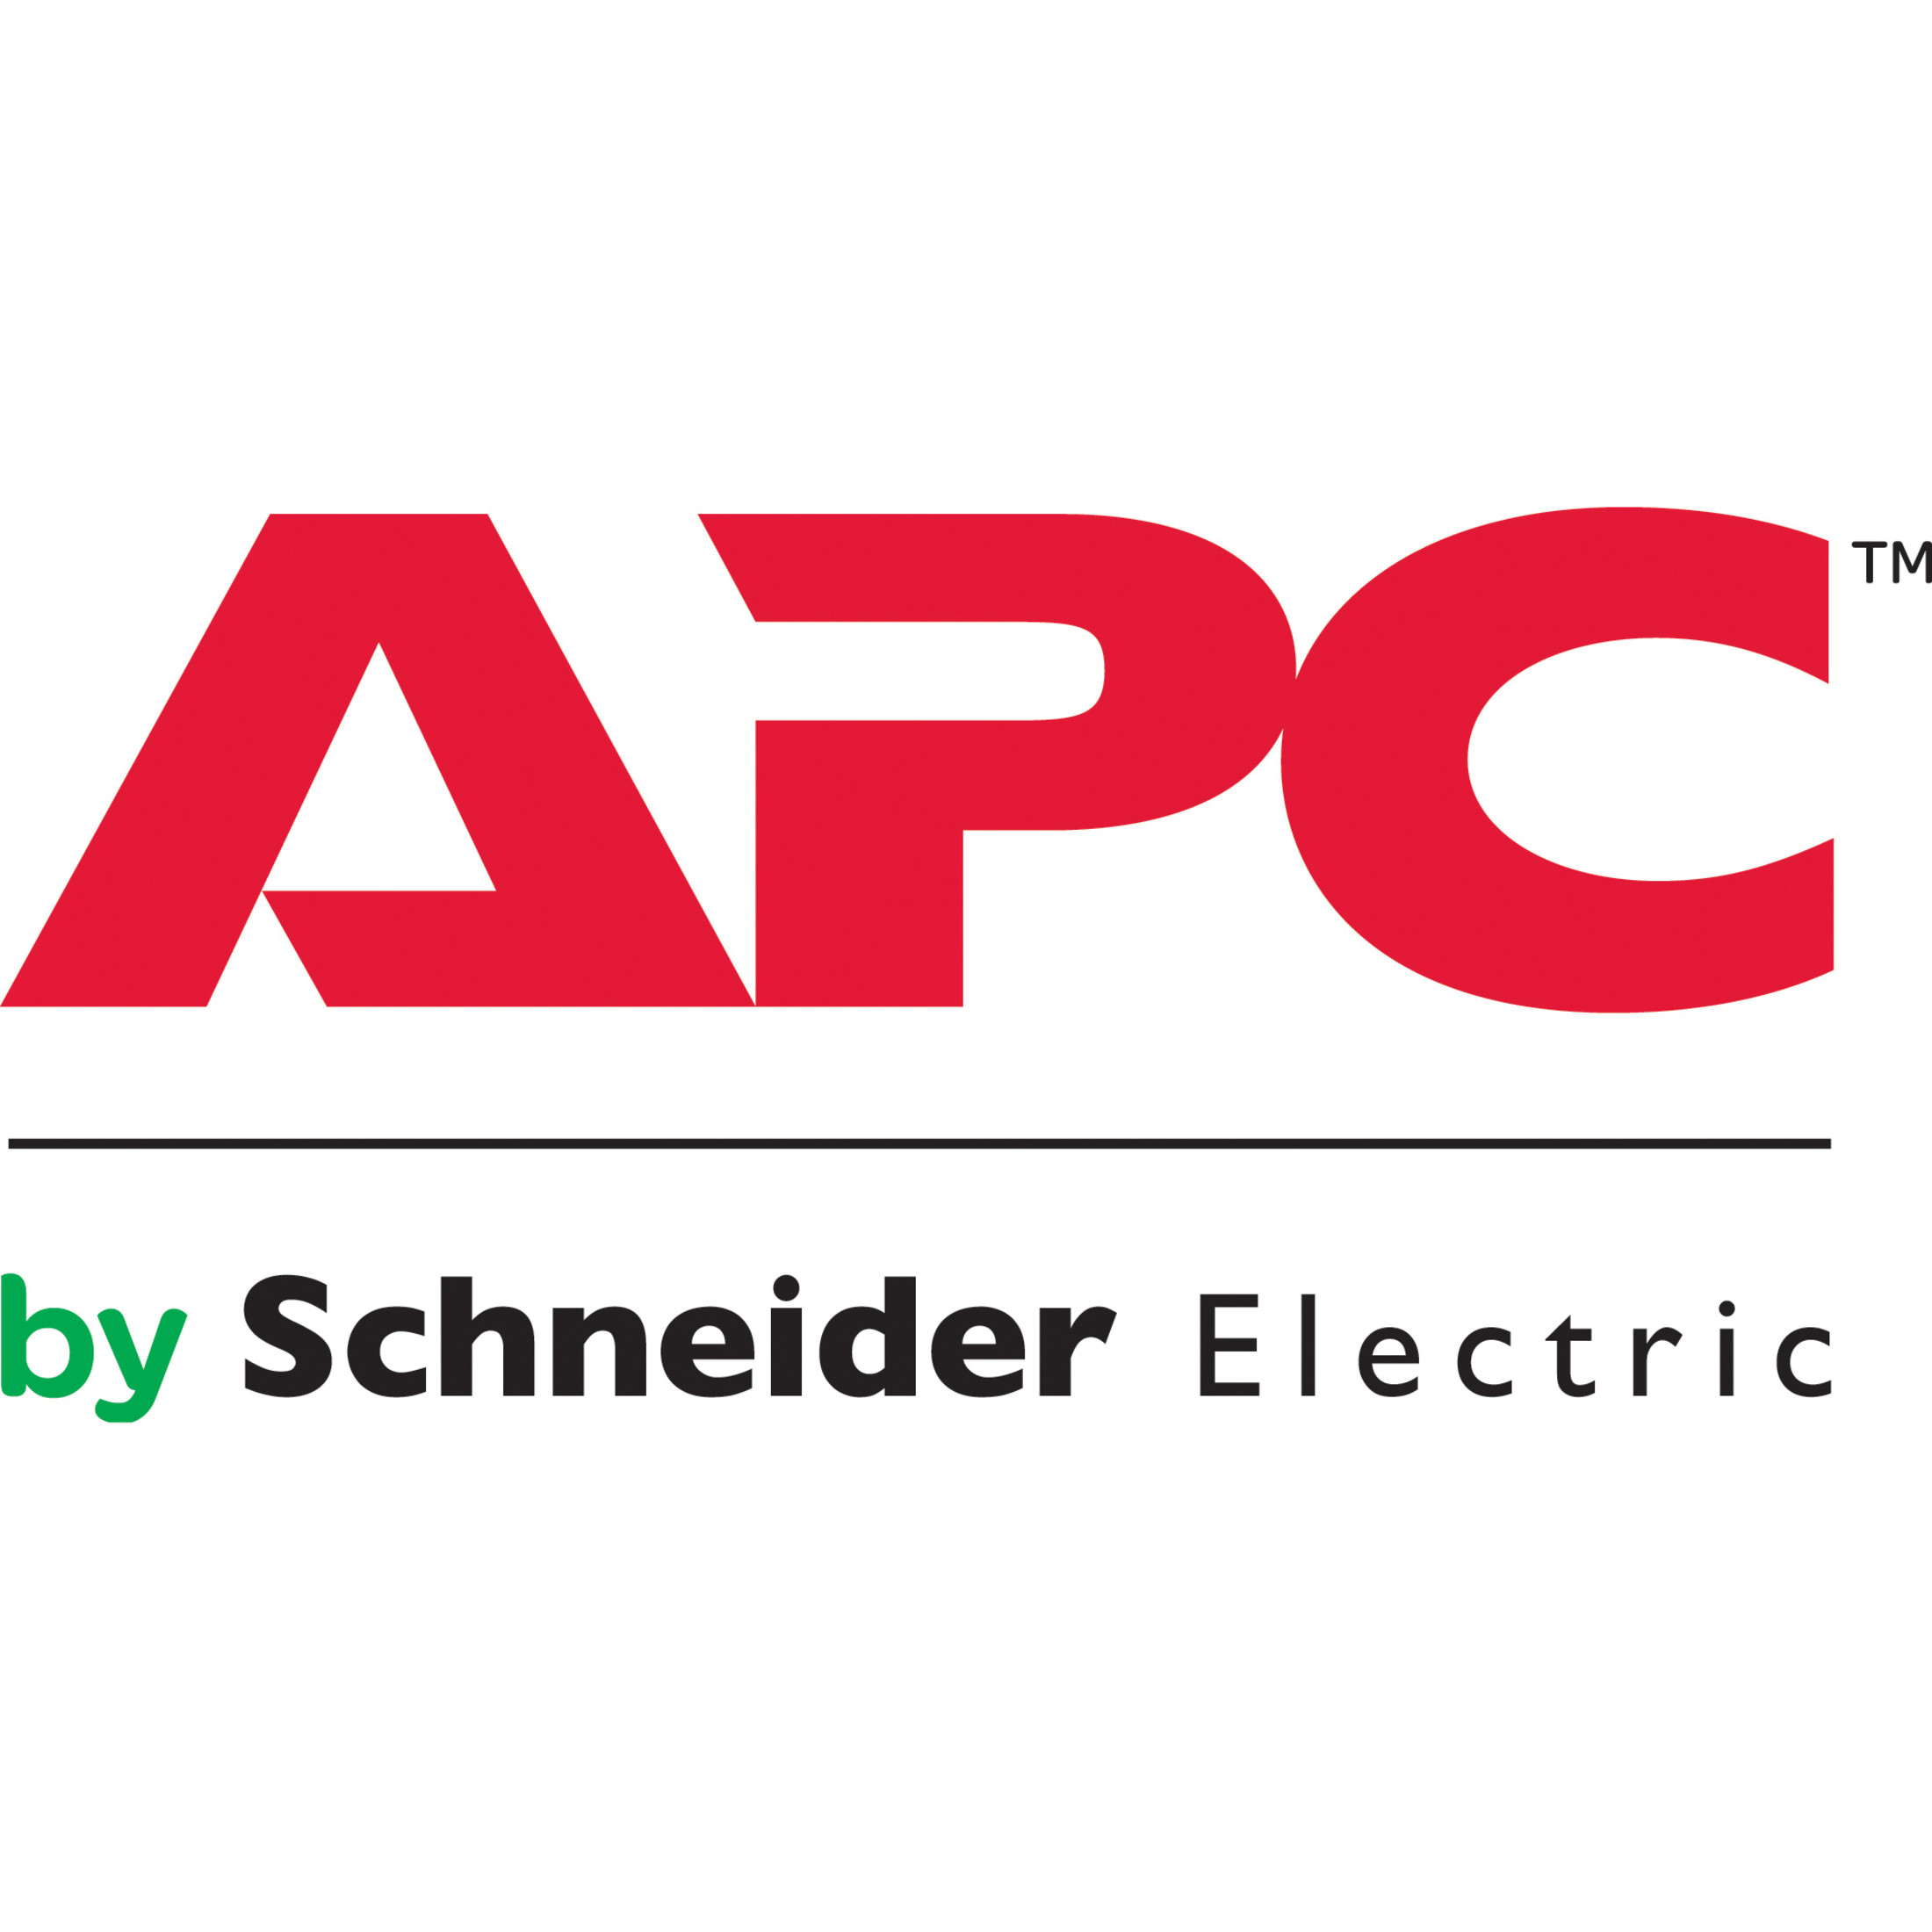 APC by Schneider Electric Data Center Operation Cooling OptimizeLicense1000 Rack SWDCO1000RCL-DIGI